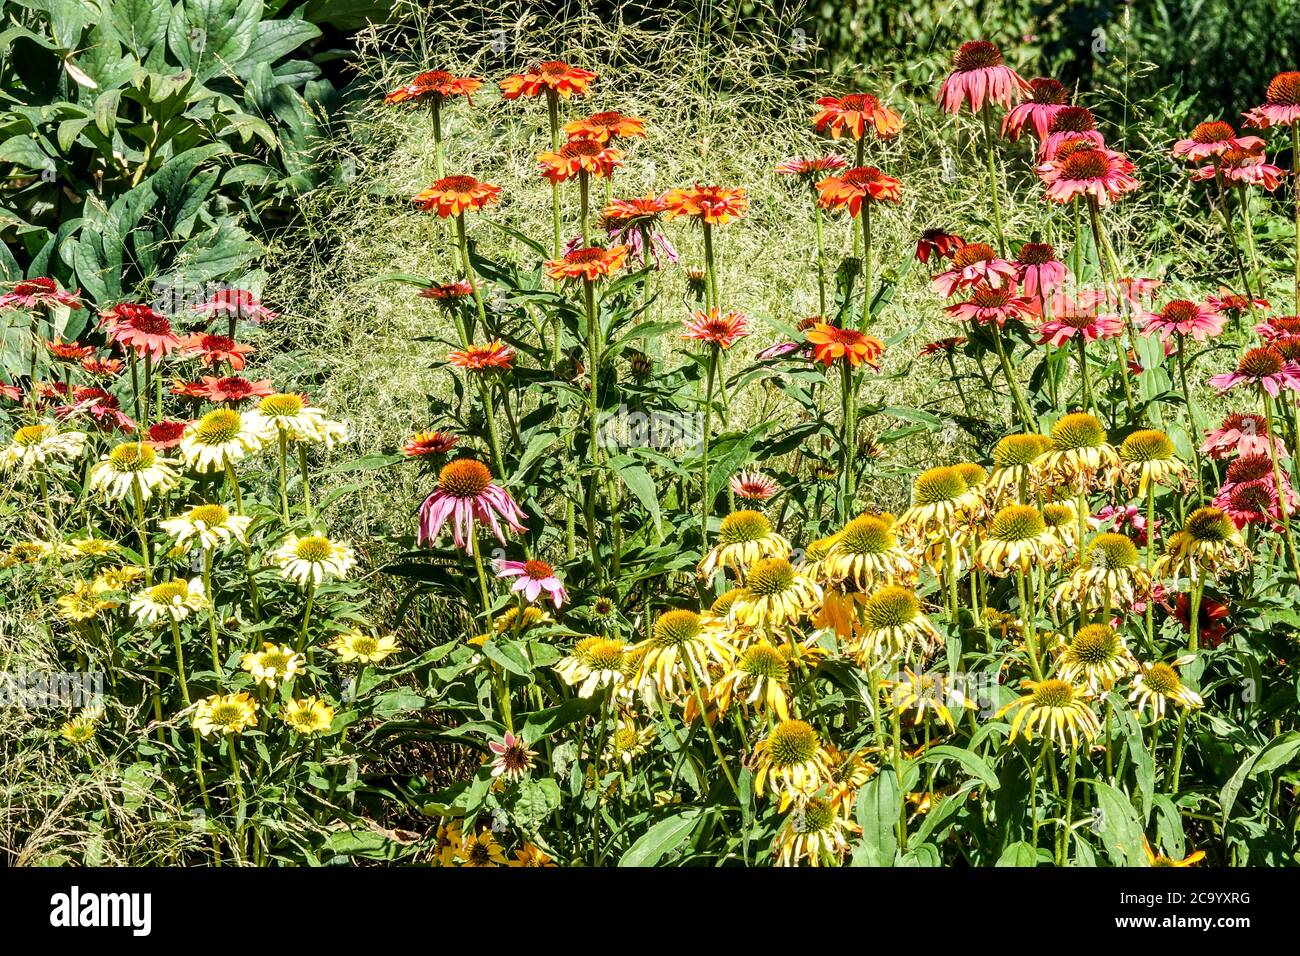 Hardy perennials flowers, Various colors of Echinacea Cheyenne Spirit grows in garden border grasses coneflowers Stock Photo